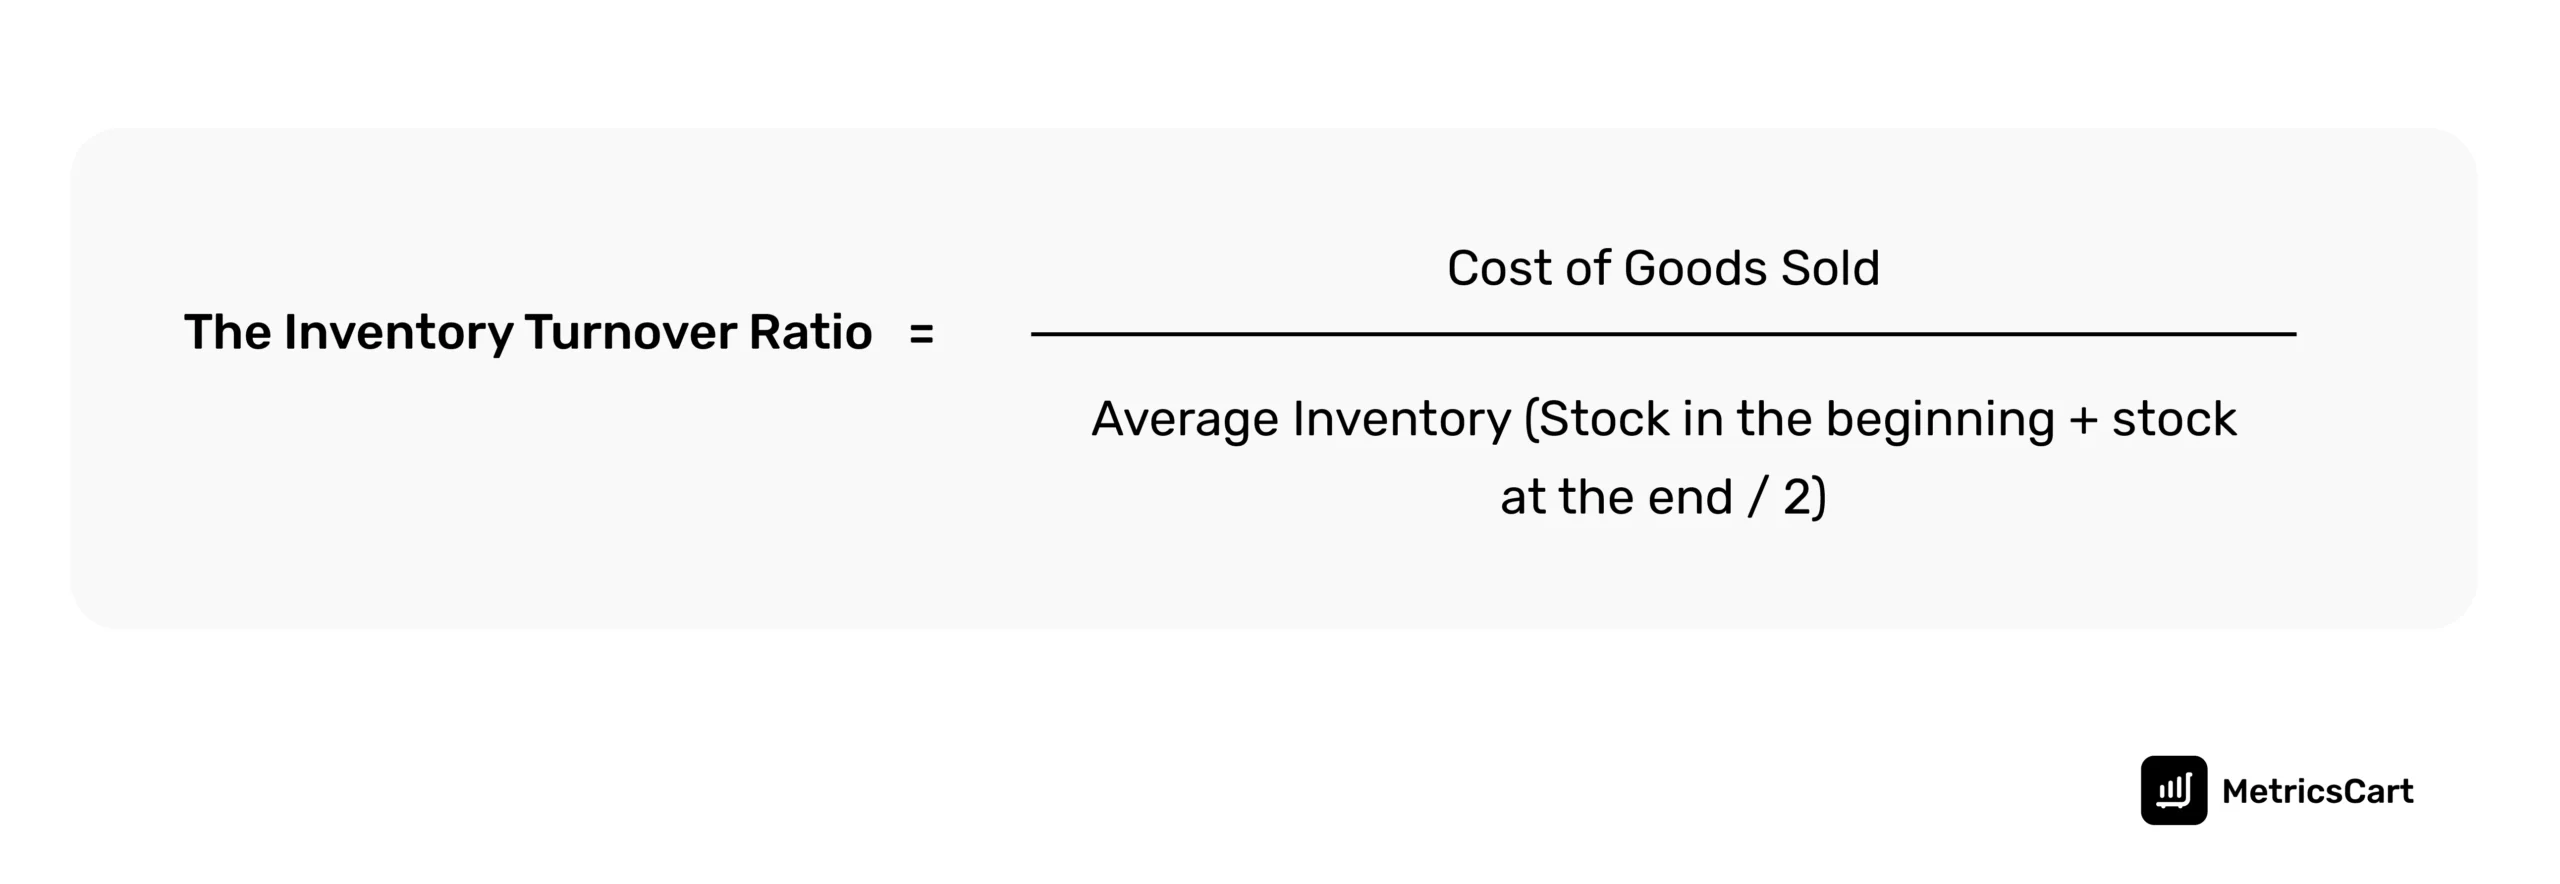 image showing inventory turnover ratio formula for calculating excess inventory